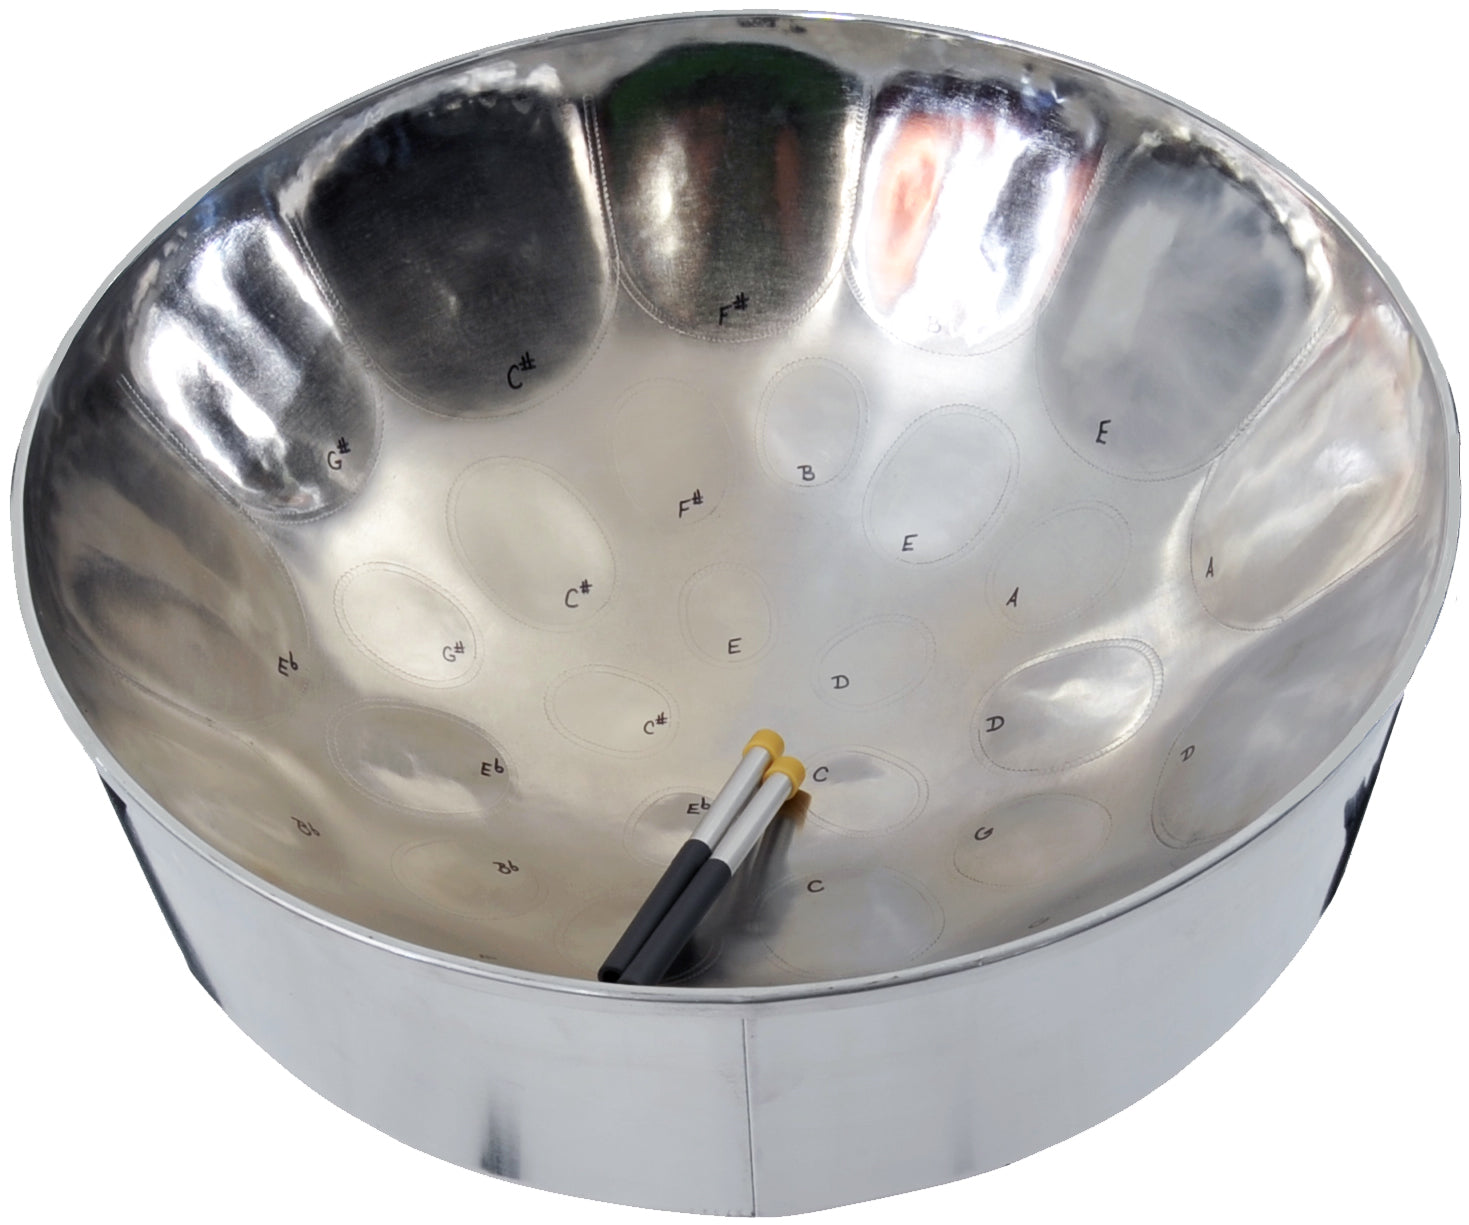 Steeldrum price - Buy imported Steelpan & accessories from Trinidad